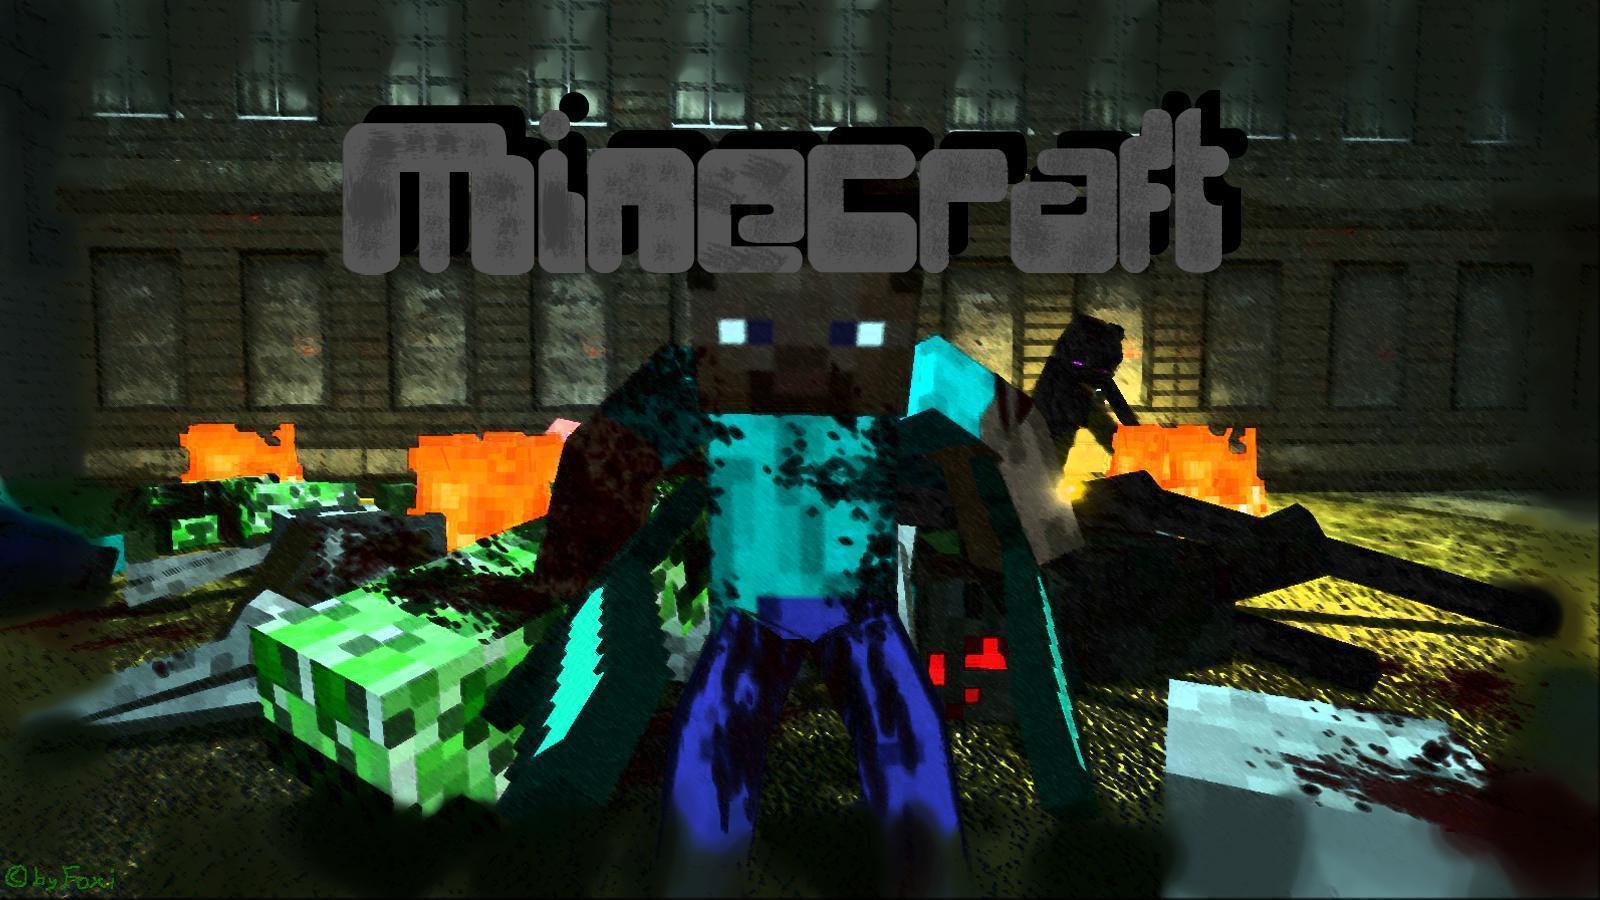 Awesome Minecraft Desktop Background Image & Picture